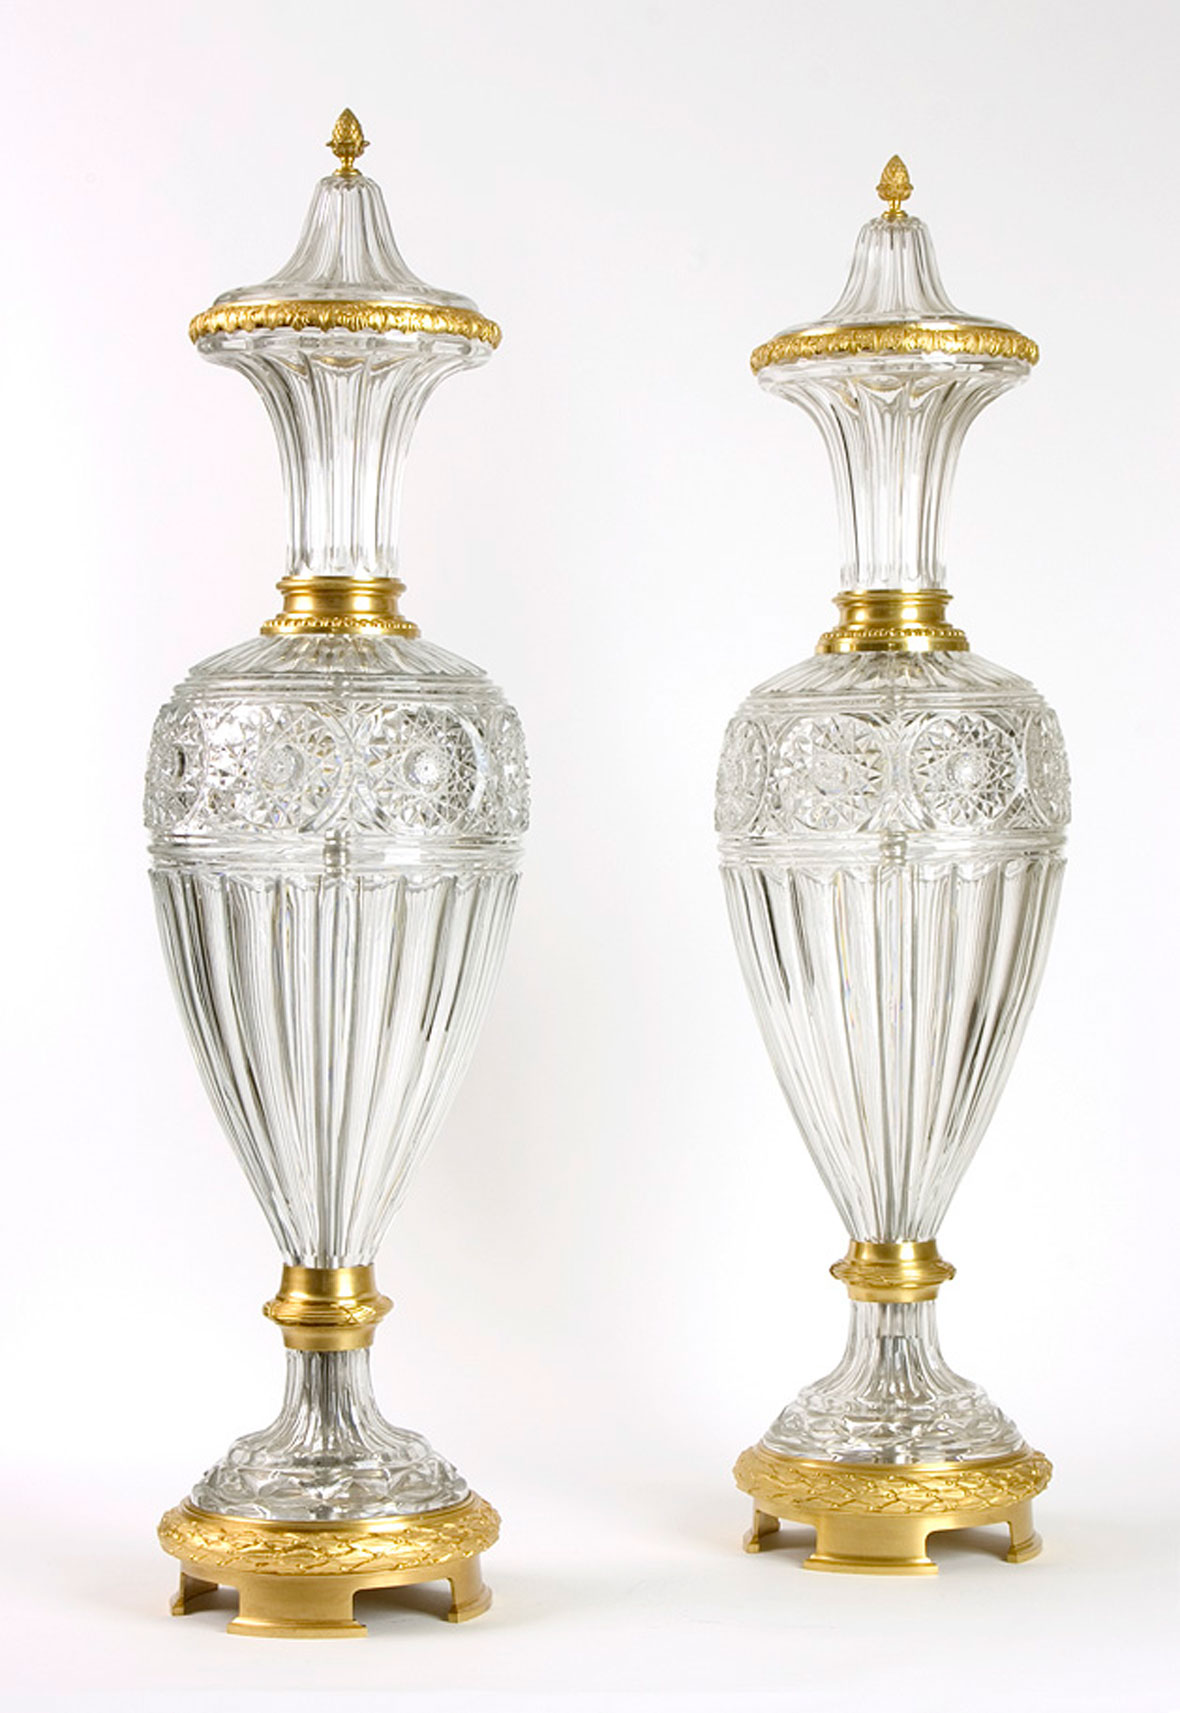 Pair of Monumental Crystal and Gilt Bronze Covered Vases by Baccarat